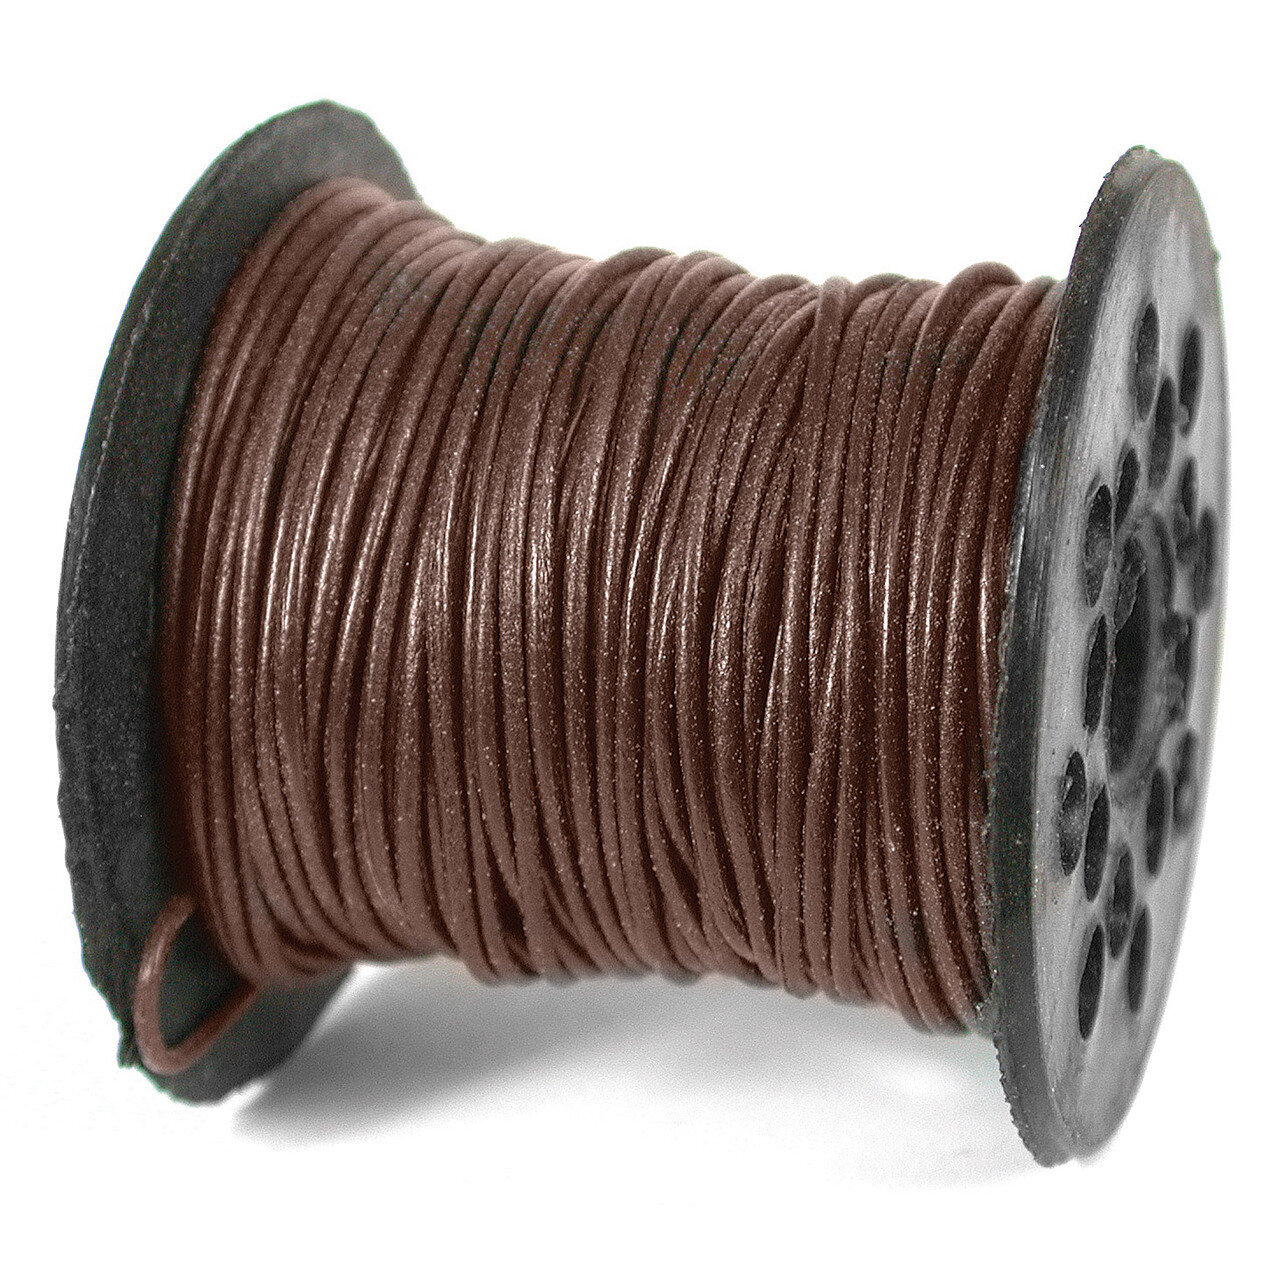 1300 1 mm. 100 Yard Brown Leather Cord CRD843/1.0-100